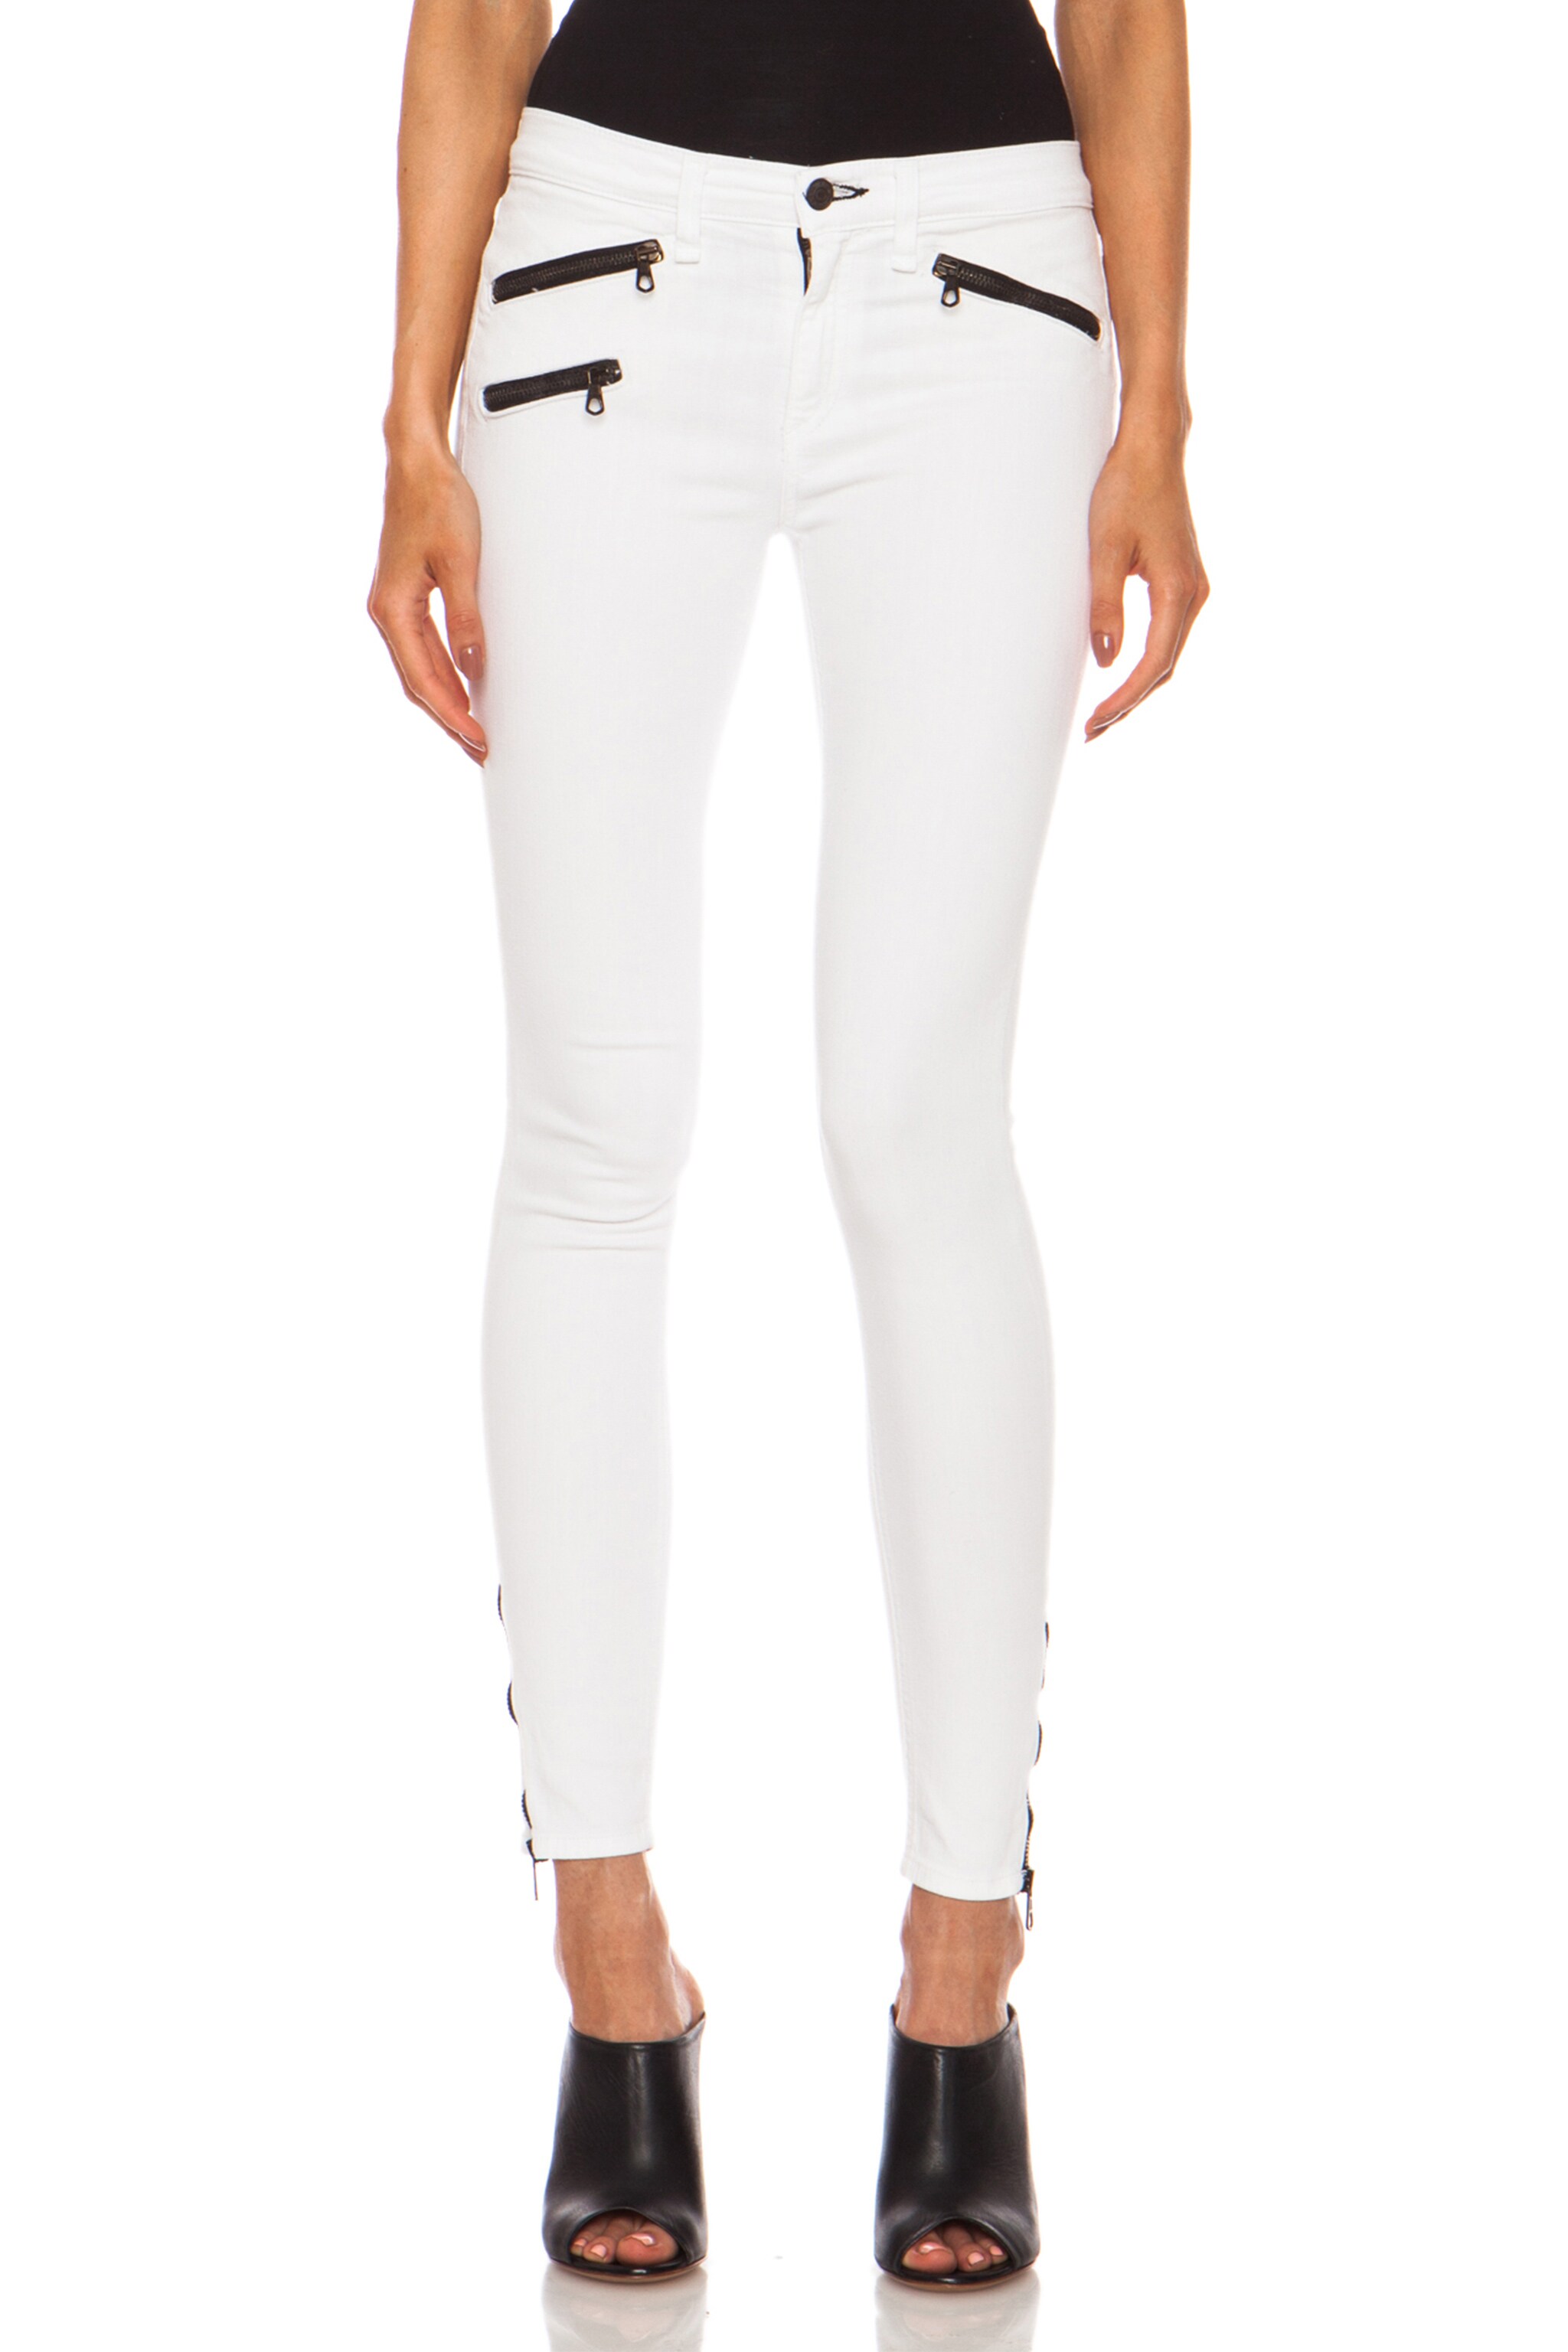 Image 1 of Rag & Bone RBW 23 Crop in Bright White